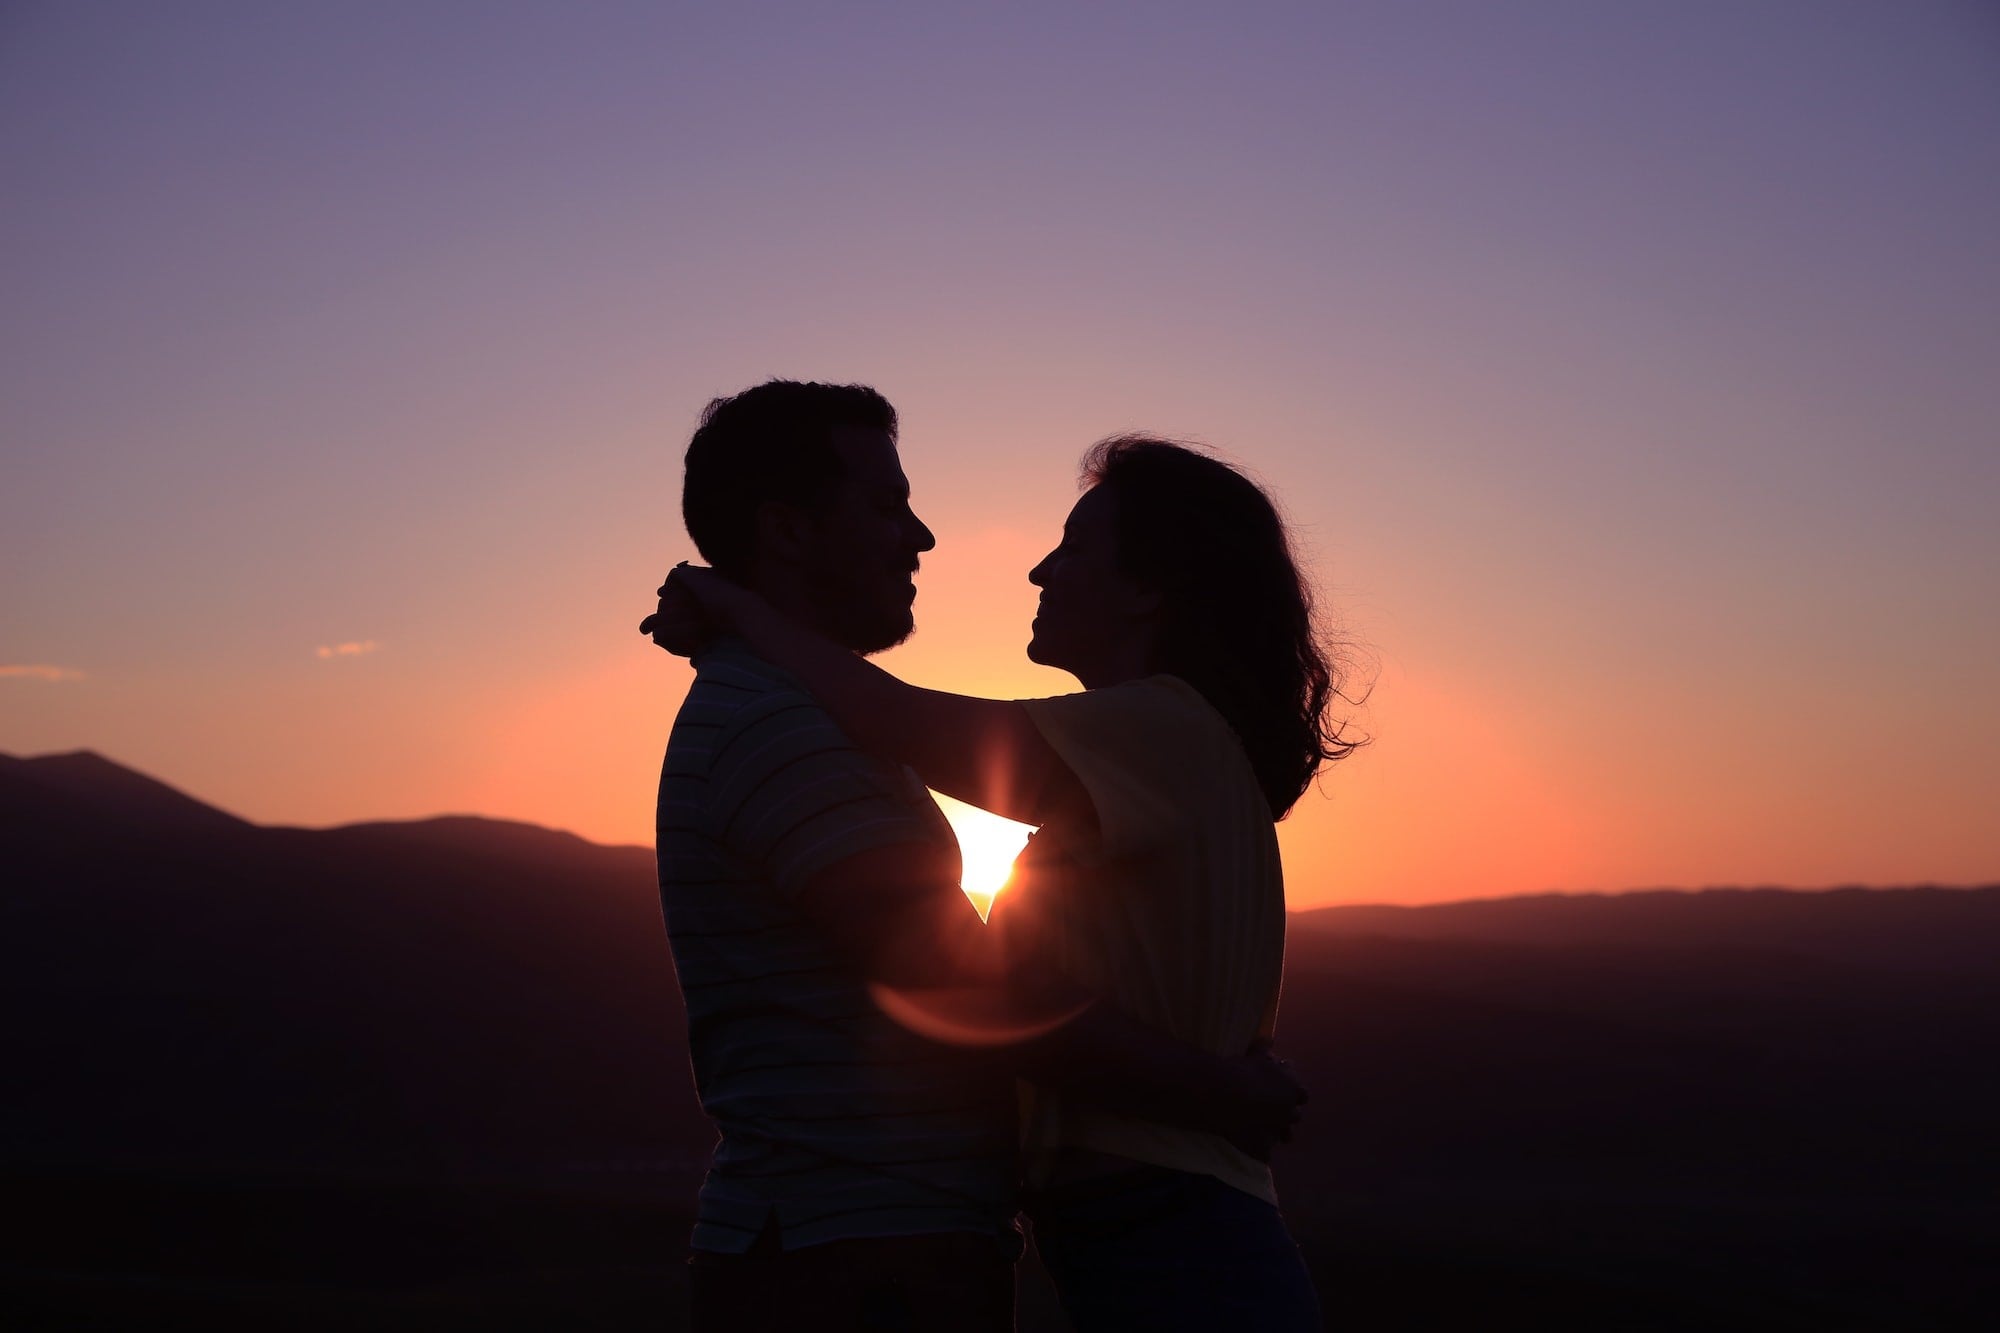 Image of a couple holding each other in the sunset. Image links to webpage describing relationship challenges, attachment styles, and counseling services.